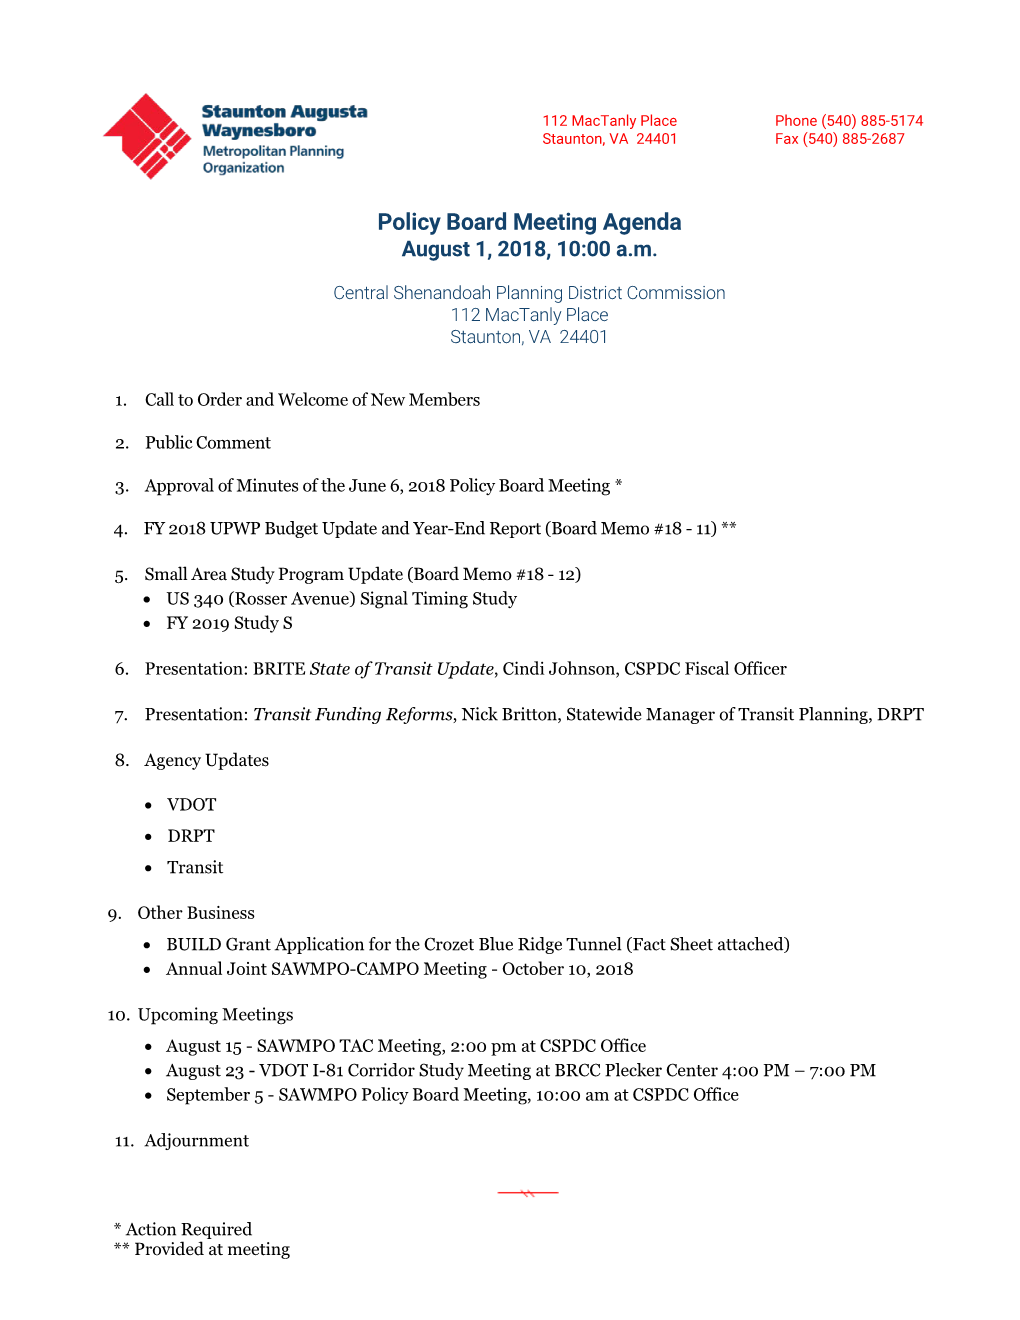 Policy Board Meeting Agenda August 1, 2018, 10:00 A.M